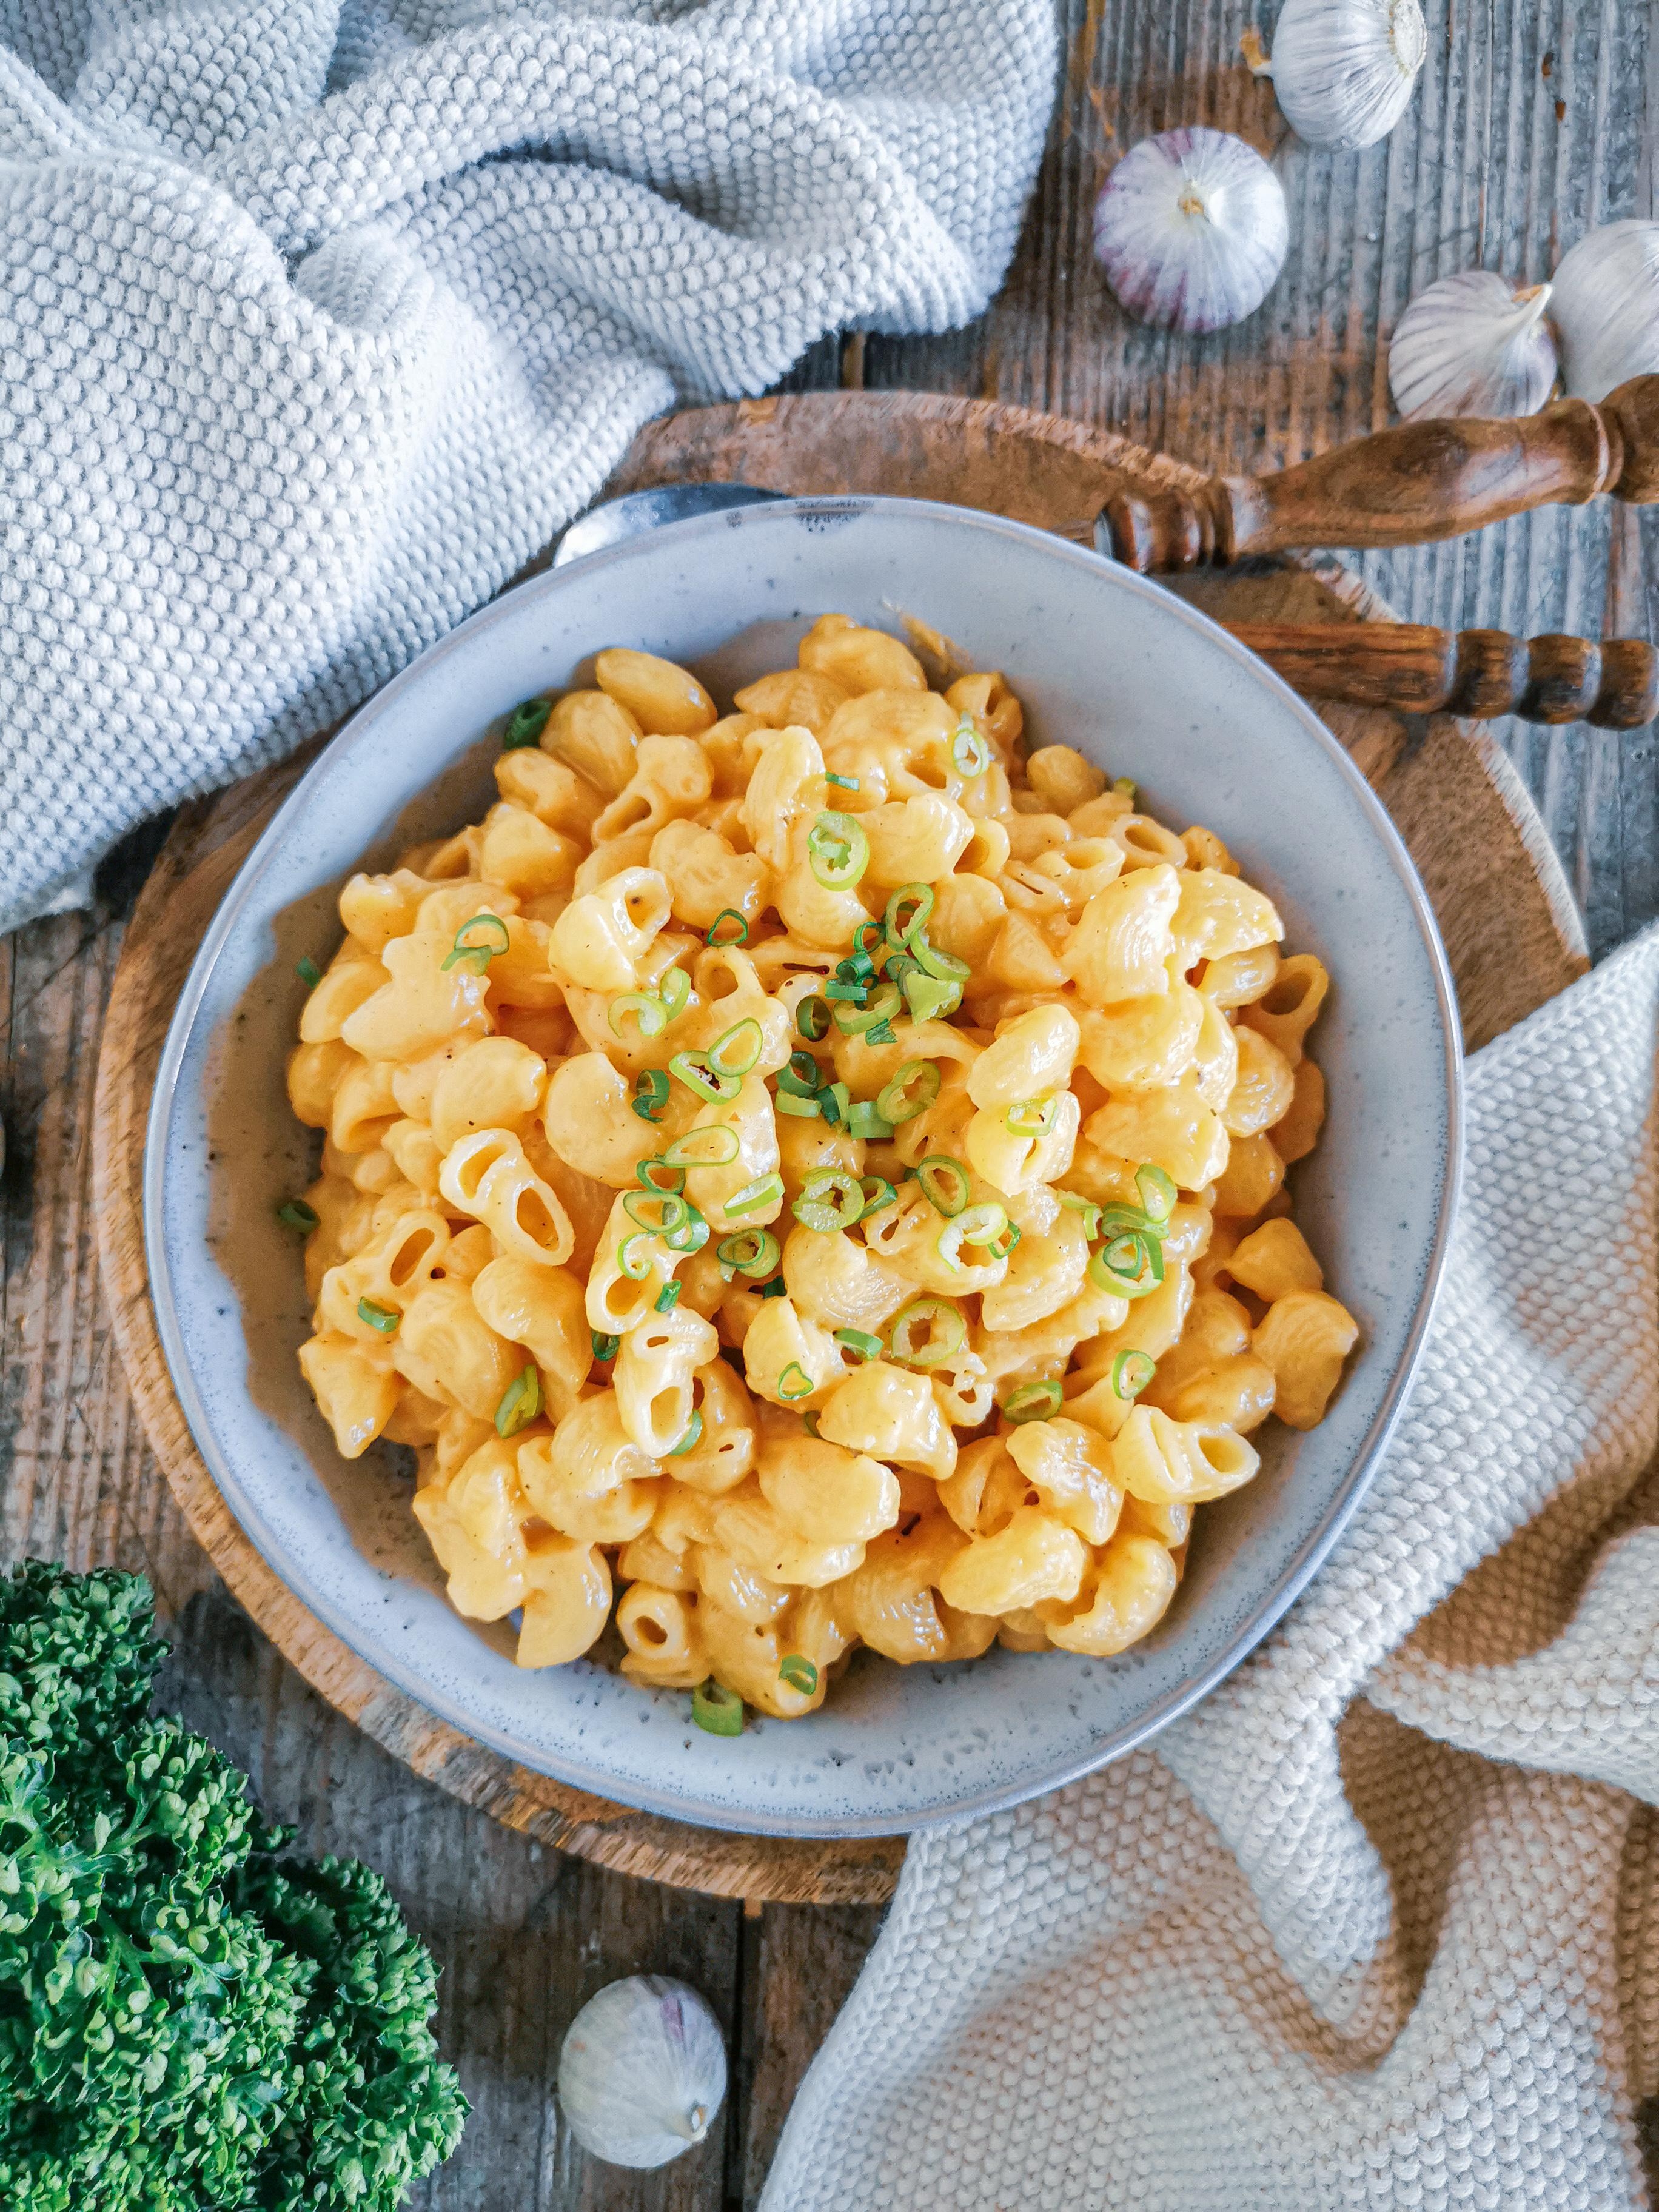 Mac'n'Cheese ohne Mac😅 das Soulfood als Onepotpasta😍#rezepte #kochen #soulfood #käse #cheese #nudeln 